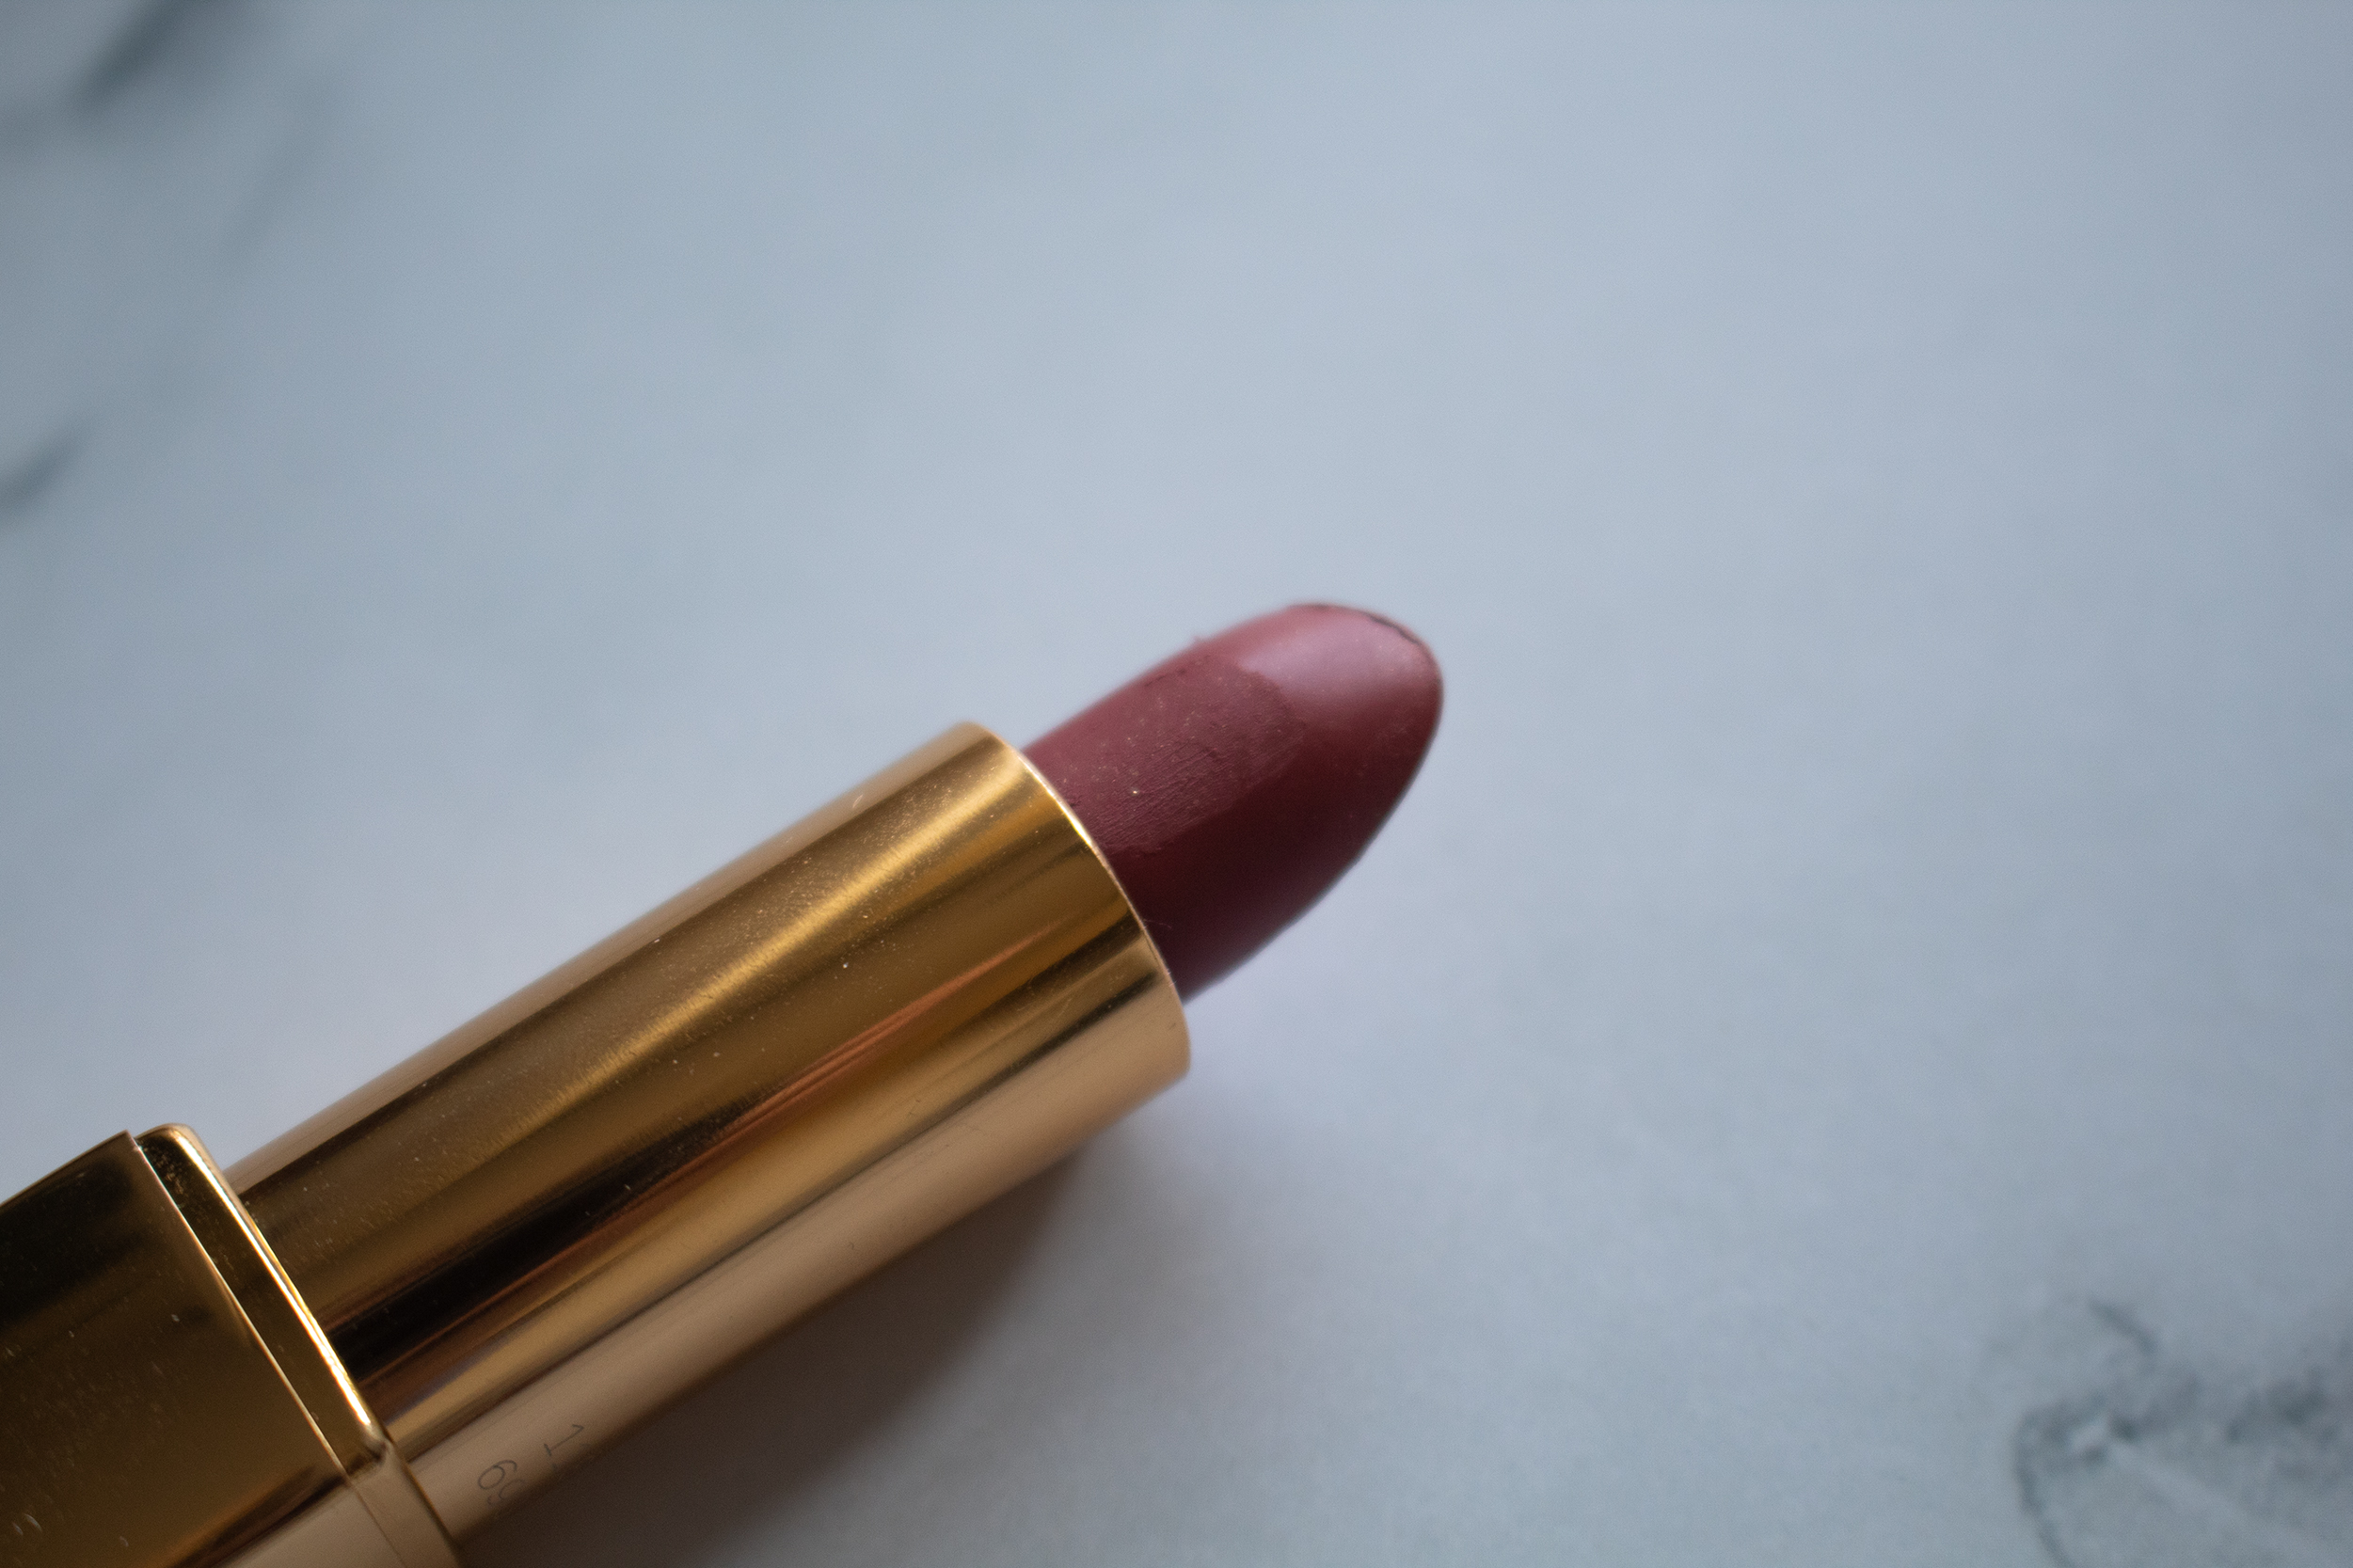 An open gold lipstick with a dark rose pink hue against a white marble background